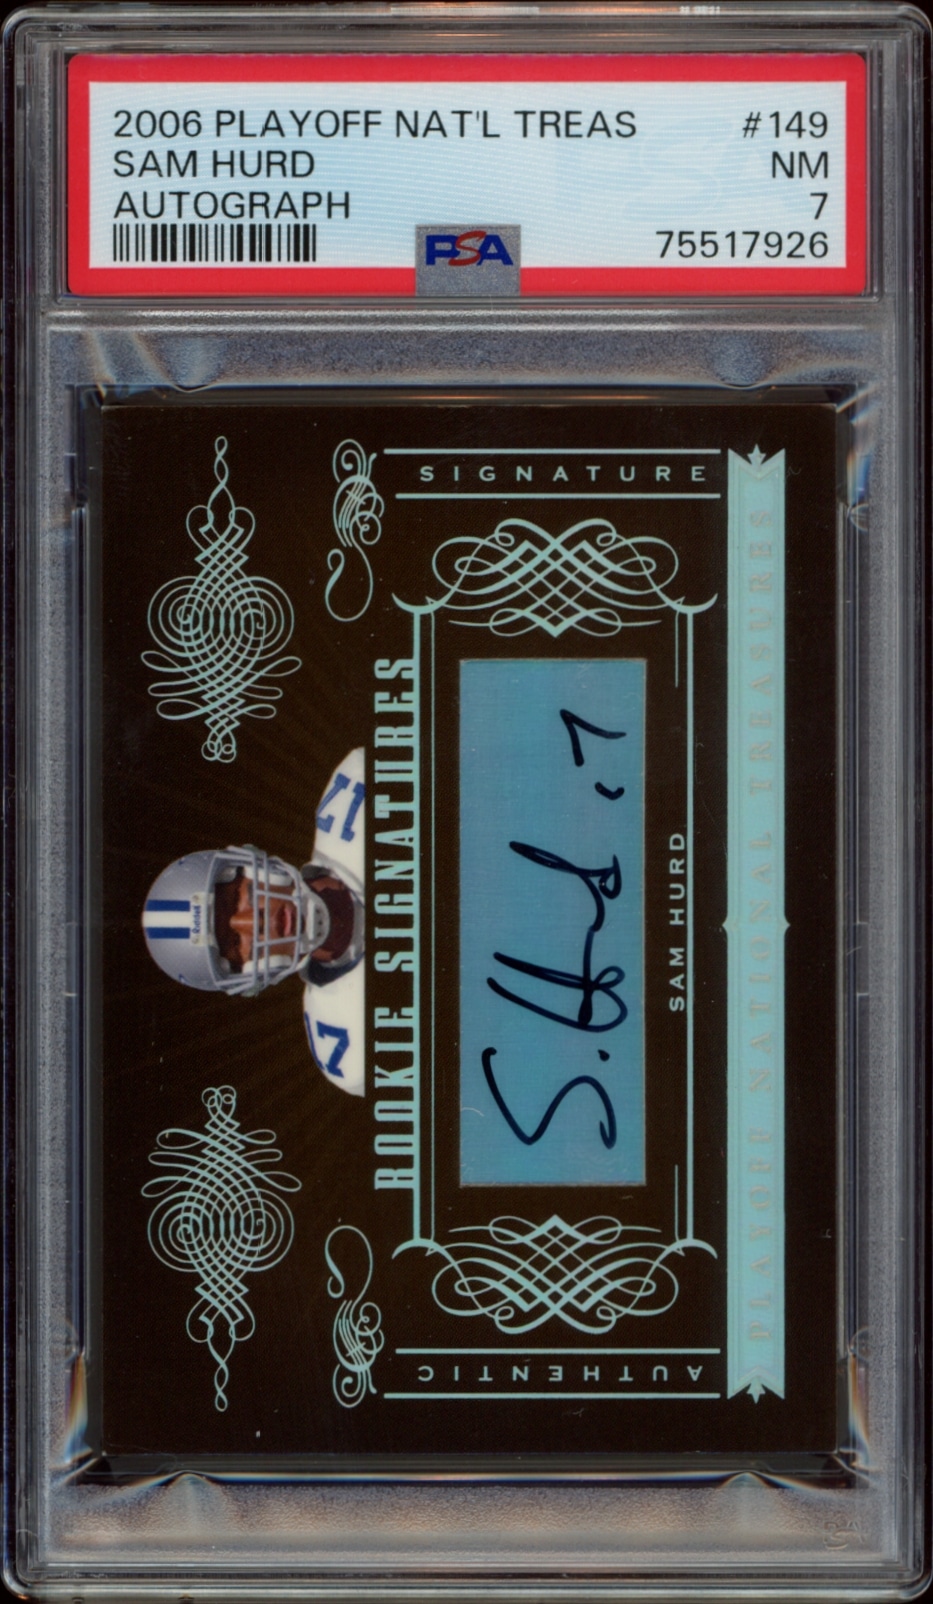 Sam Hurd signed 2006 Playoff National Treasures card #149, graded NM-MT 8 by PSA.